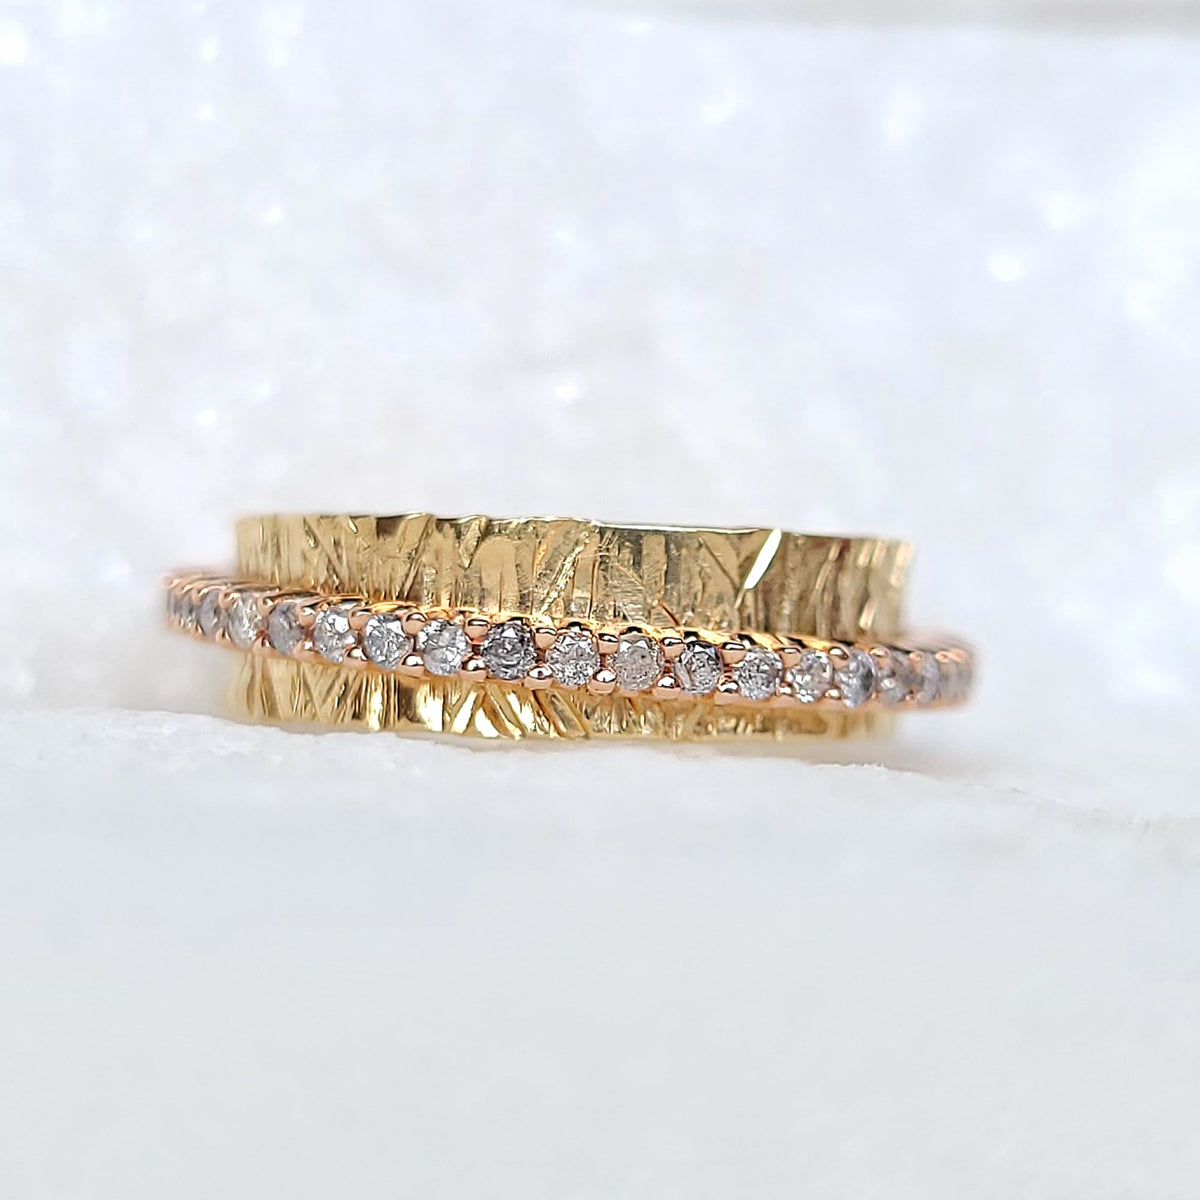 Sincerely Ginger Jewelry 14K Salt and Pepper Diamond Textured Pinky Spinner Ring in Yellow and Rose Gold 